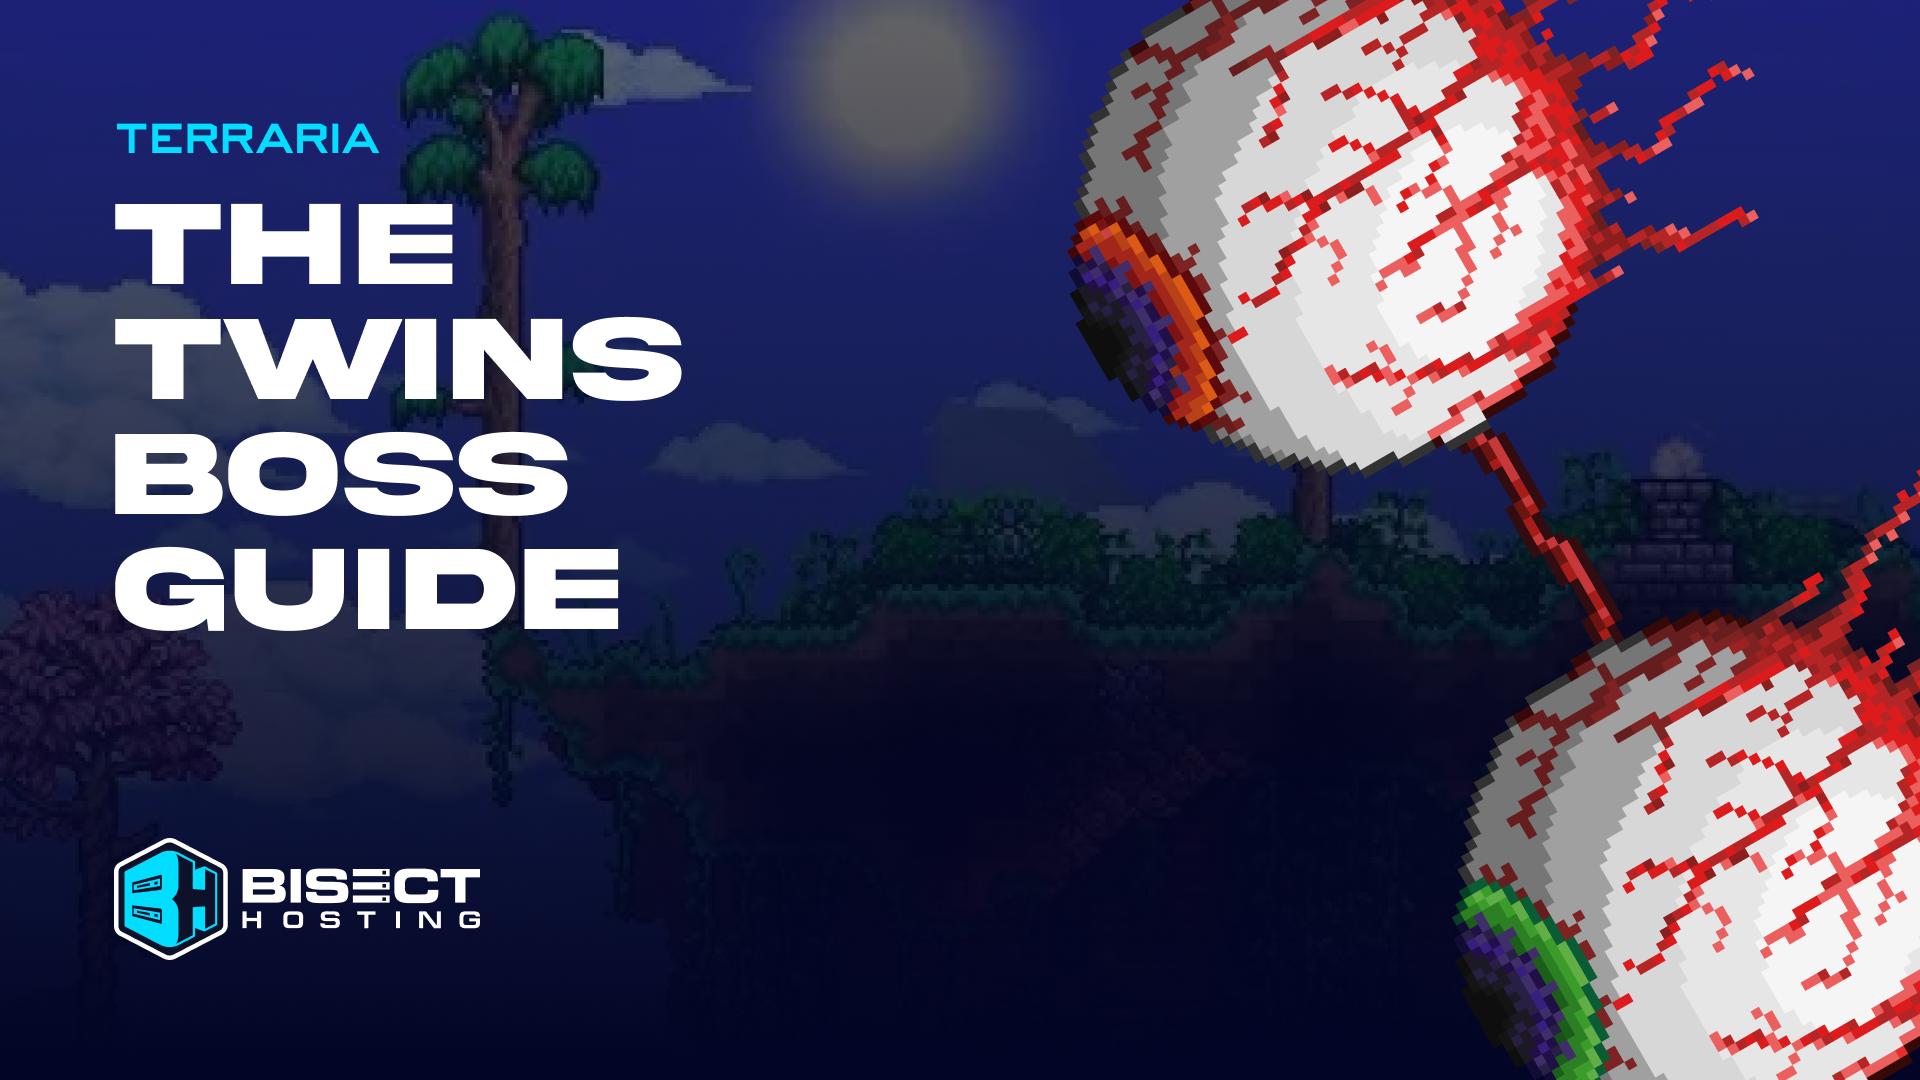 Terraria The Twins Boss Guide: How To Summon, All Loot, & Tips and Tricks